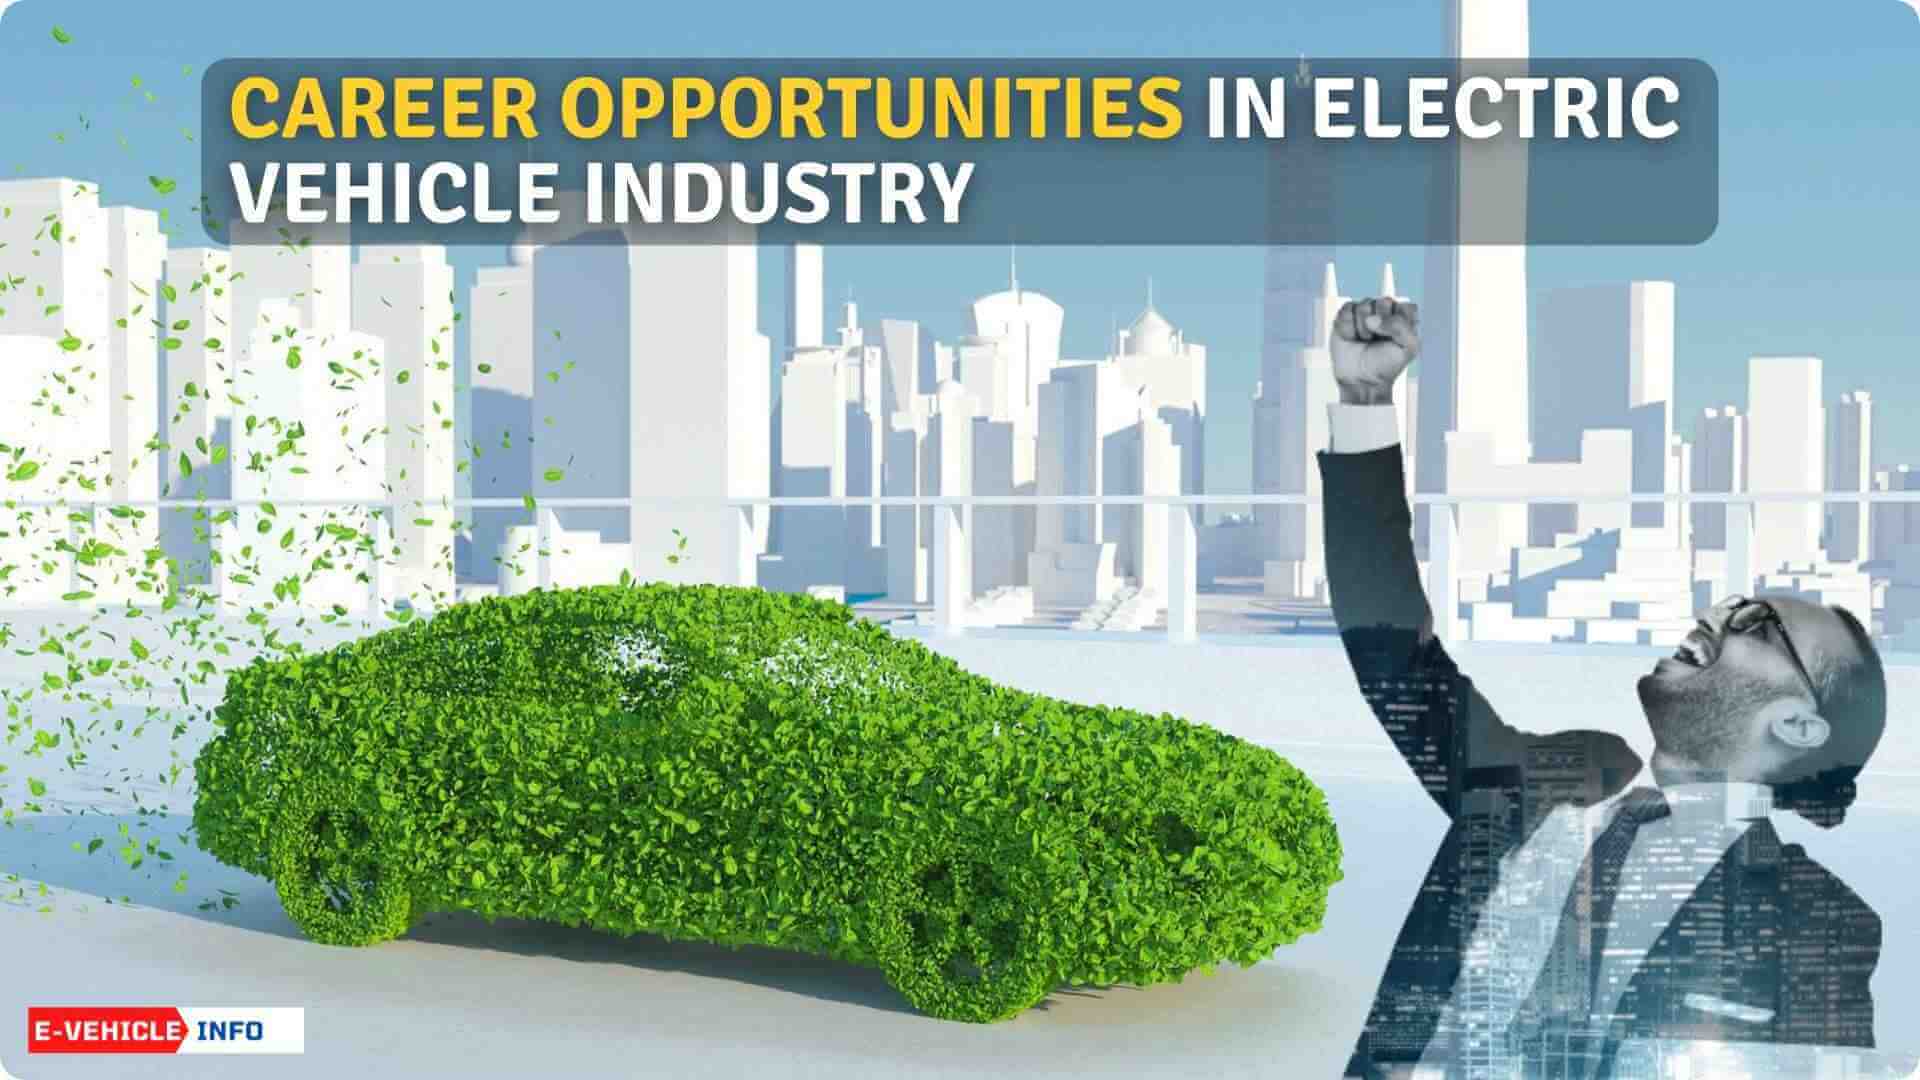 Career Opportunities in the Electric Vehicle Industry